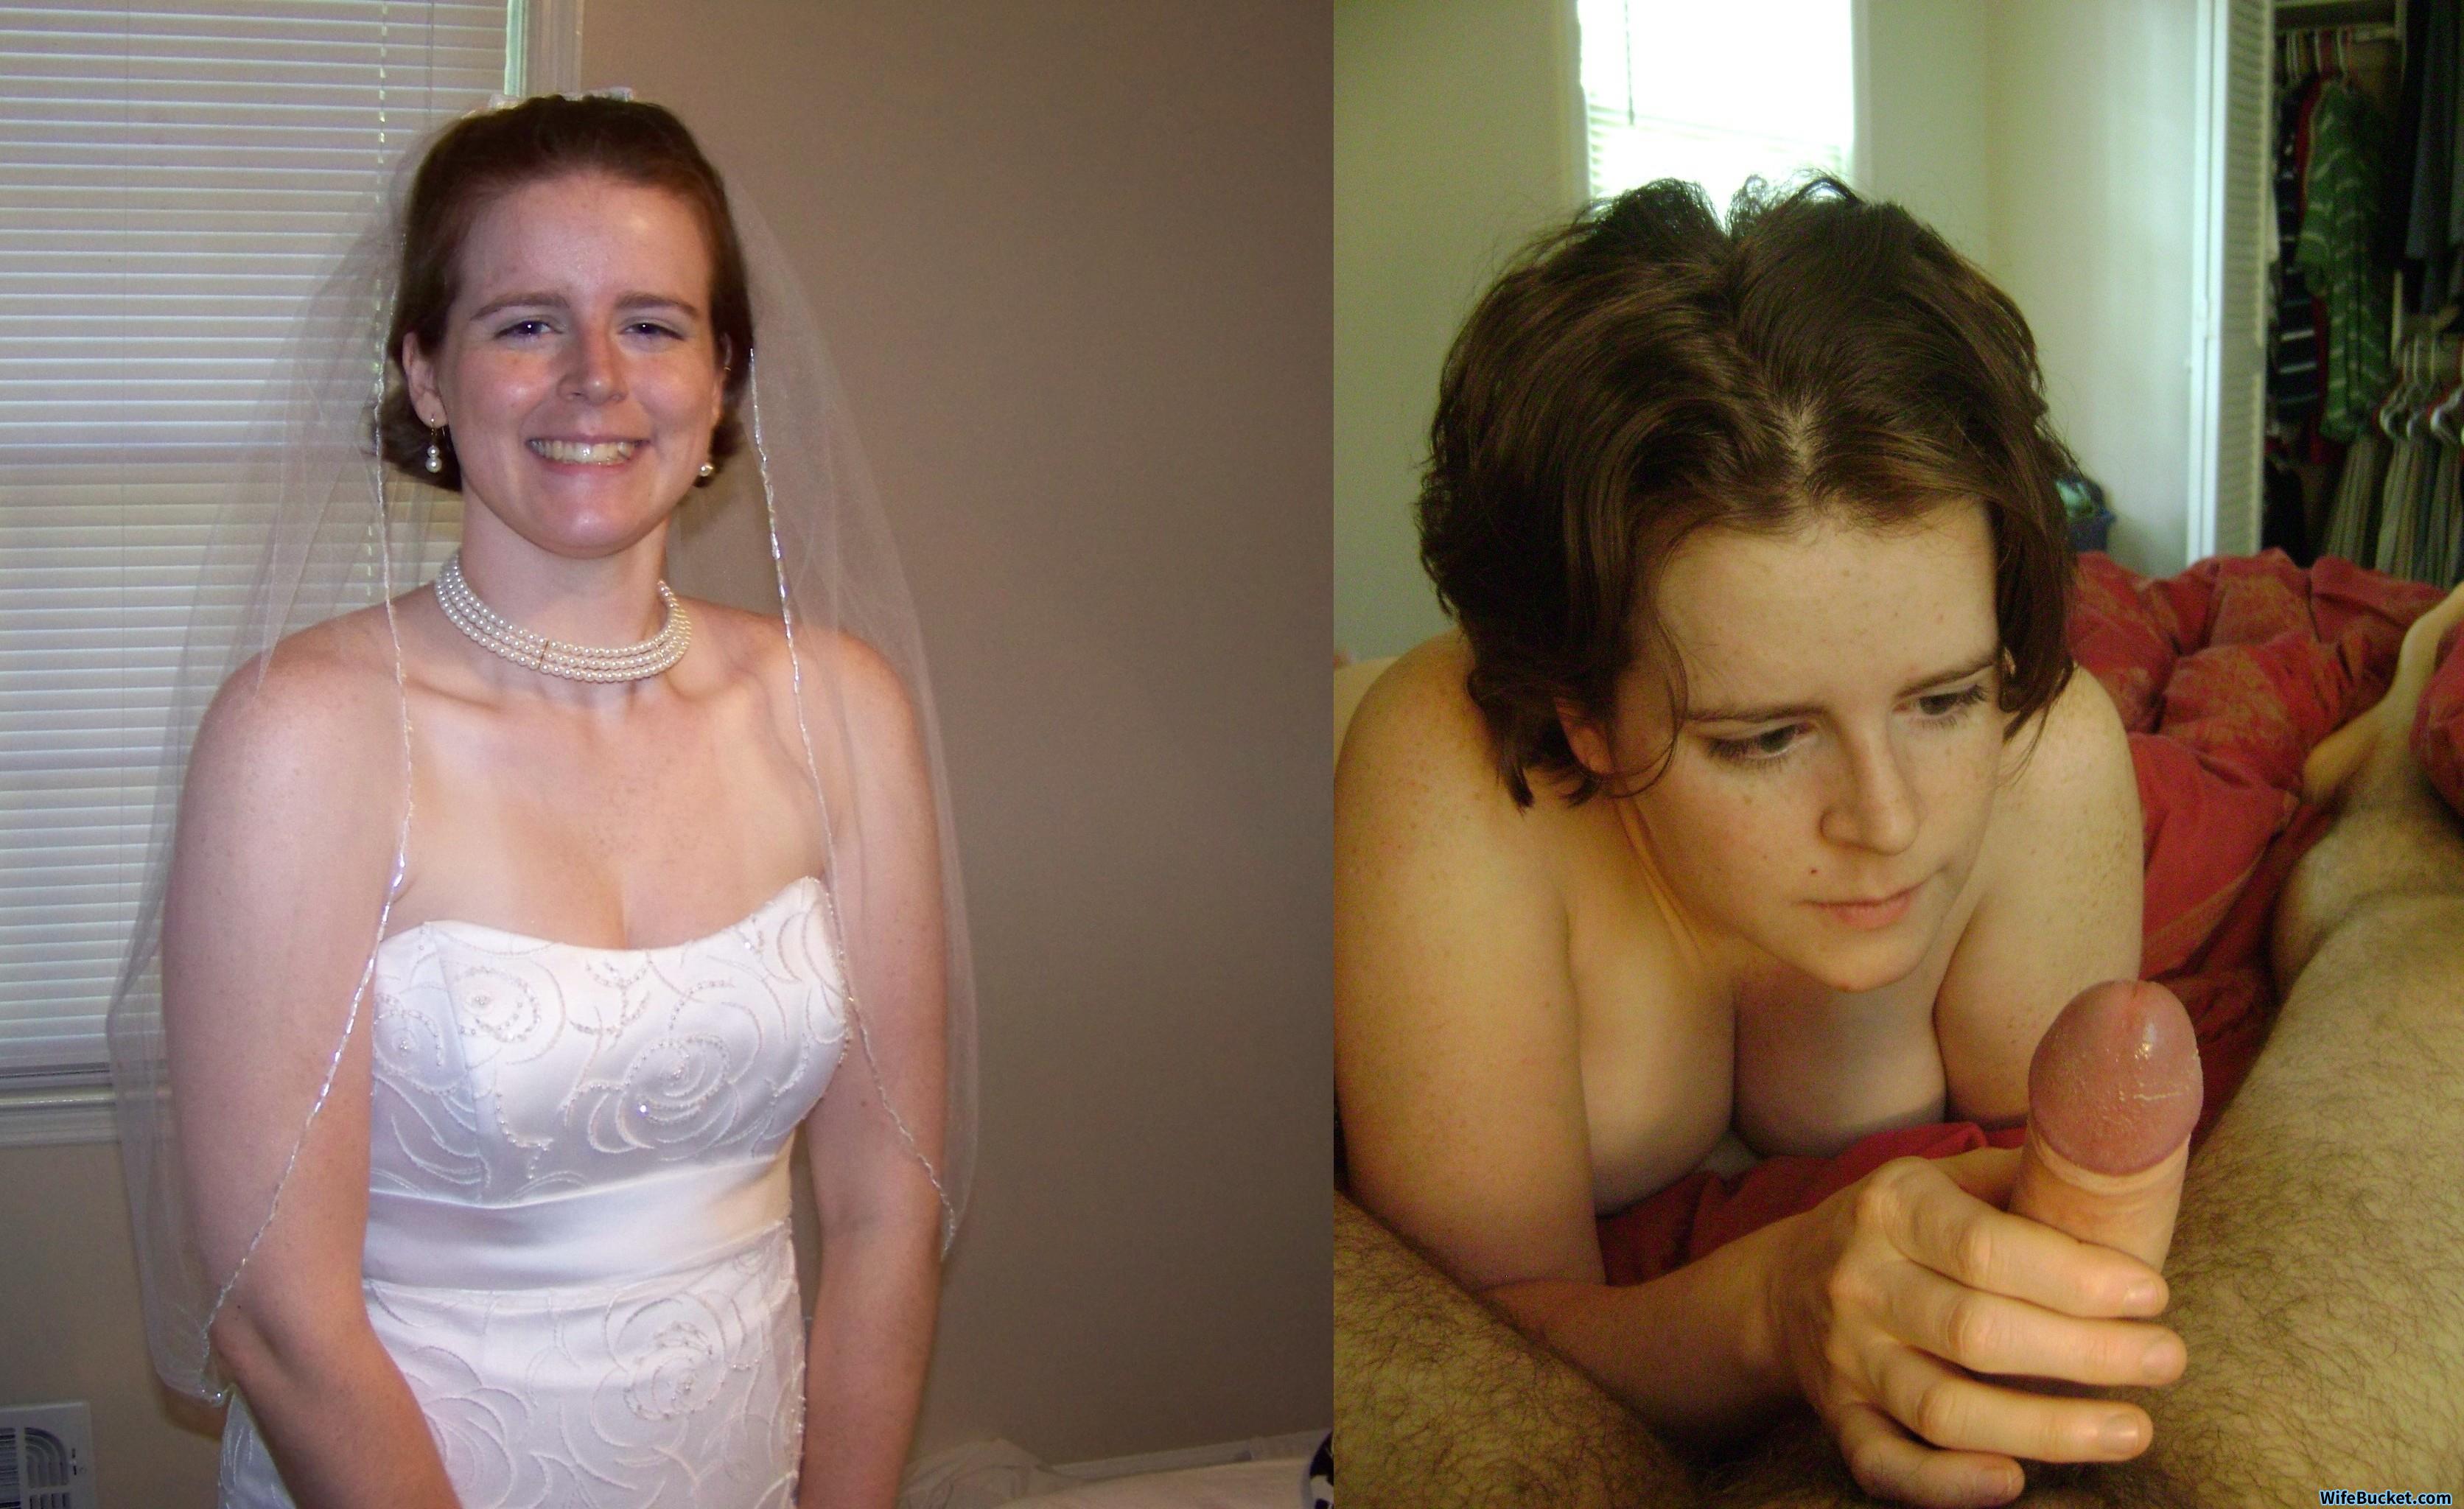 Sexy Wife Before After - before-after pics â€“ Page 4 â€“ WifeBucket | Offical MILF Blog